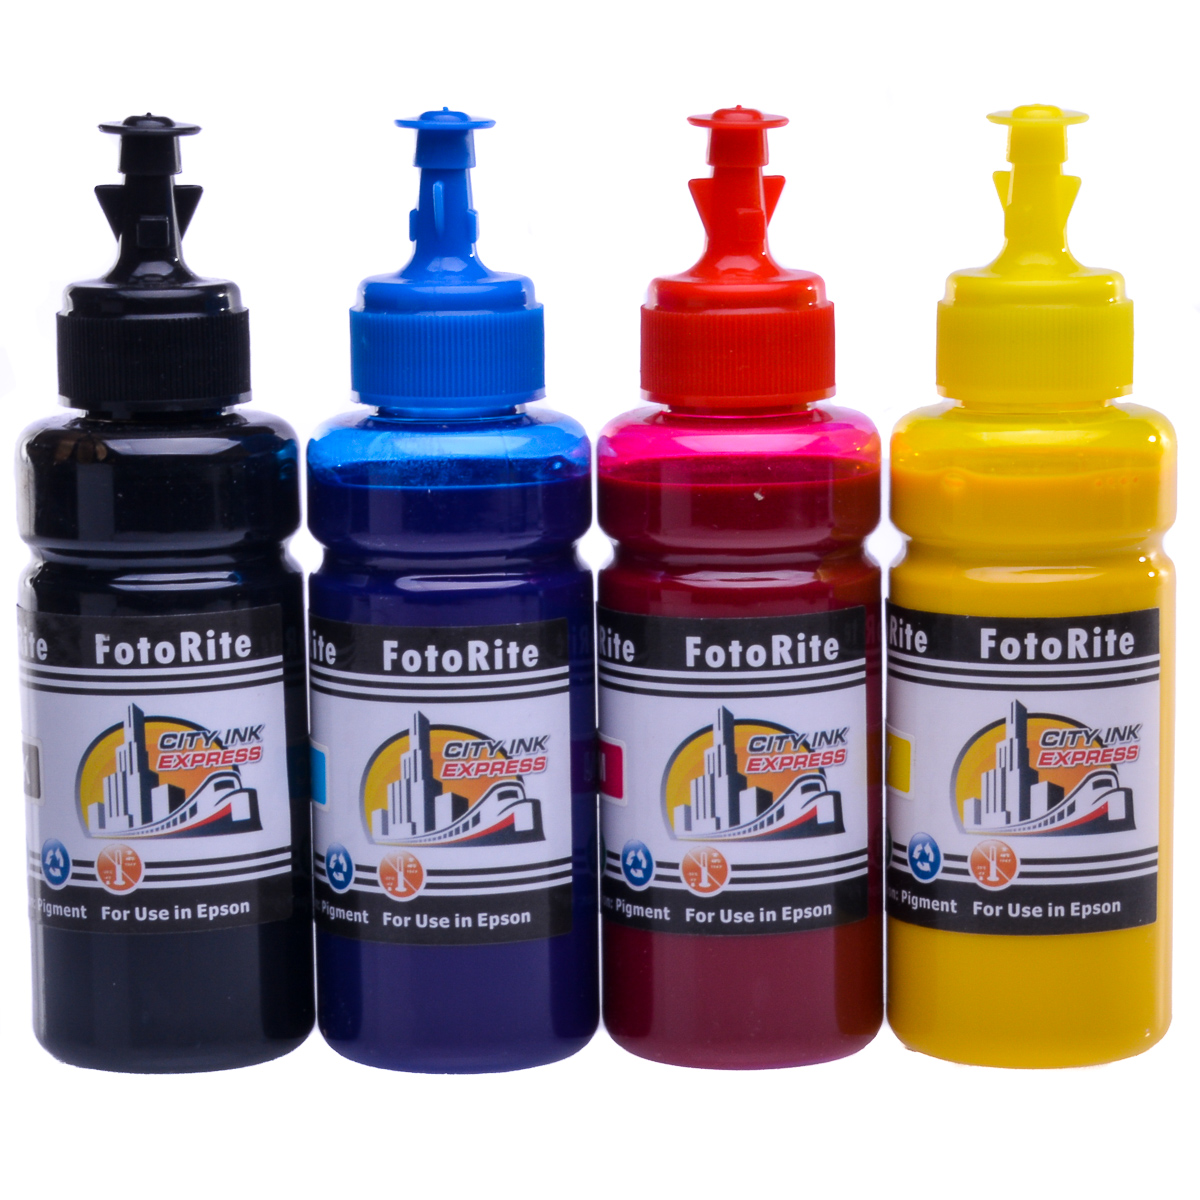 Cheap Multipack pigment ink refill replaces Epson WF-4730DTWF